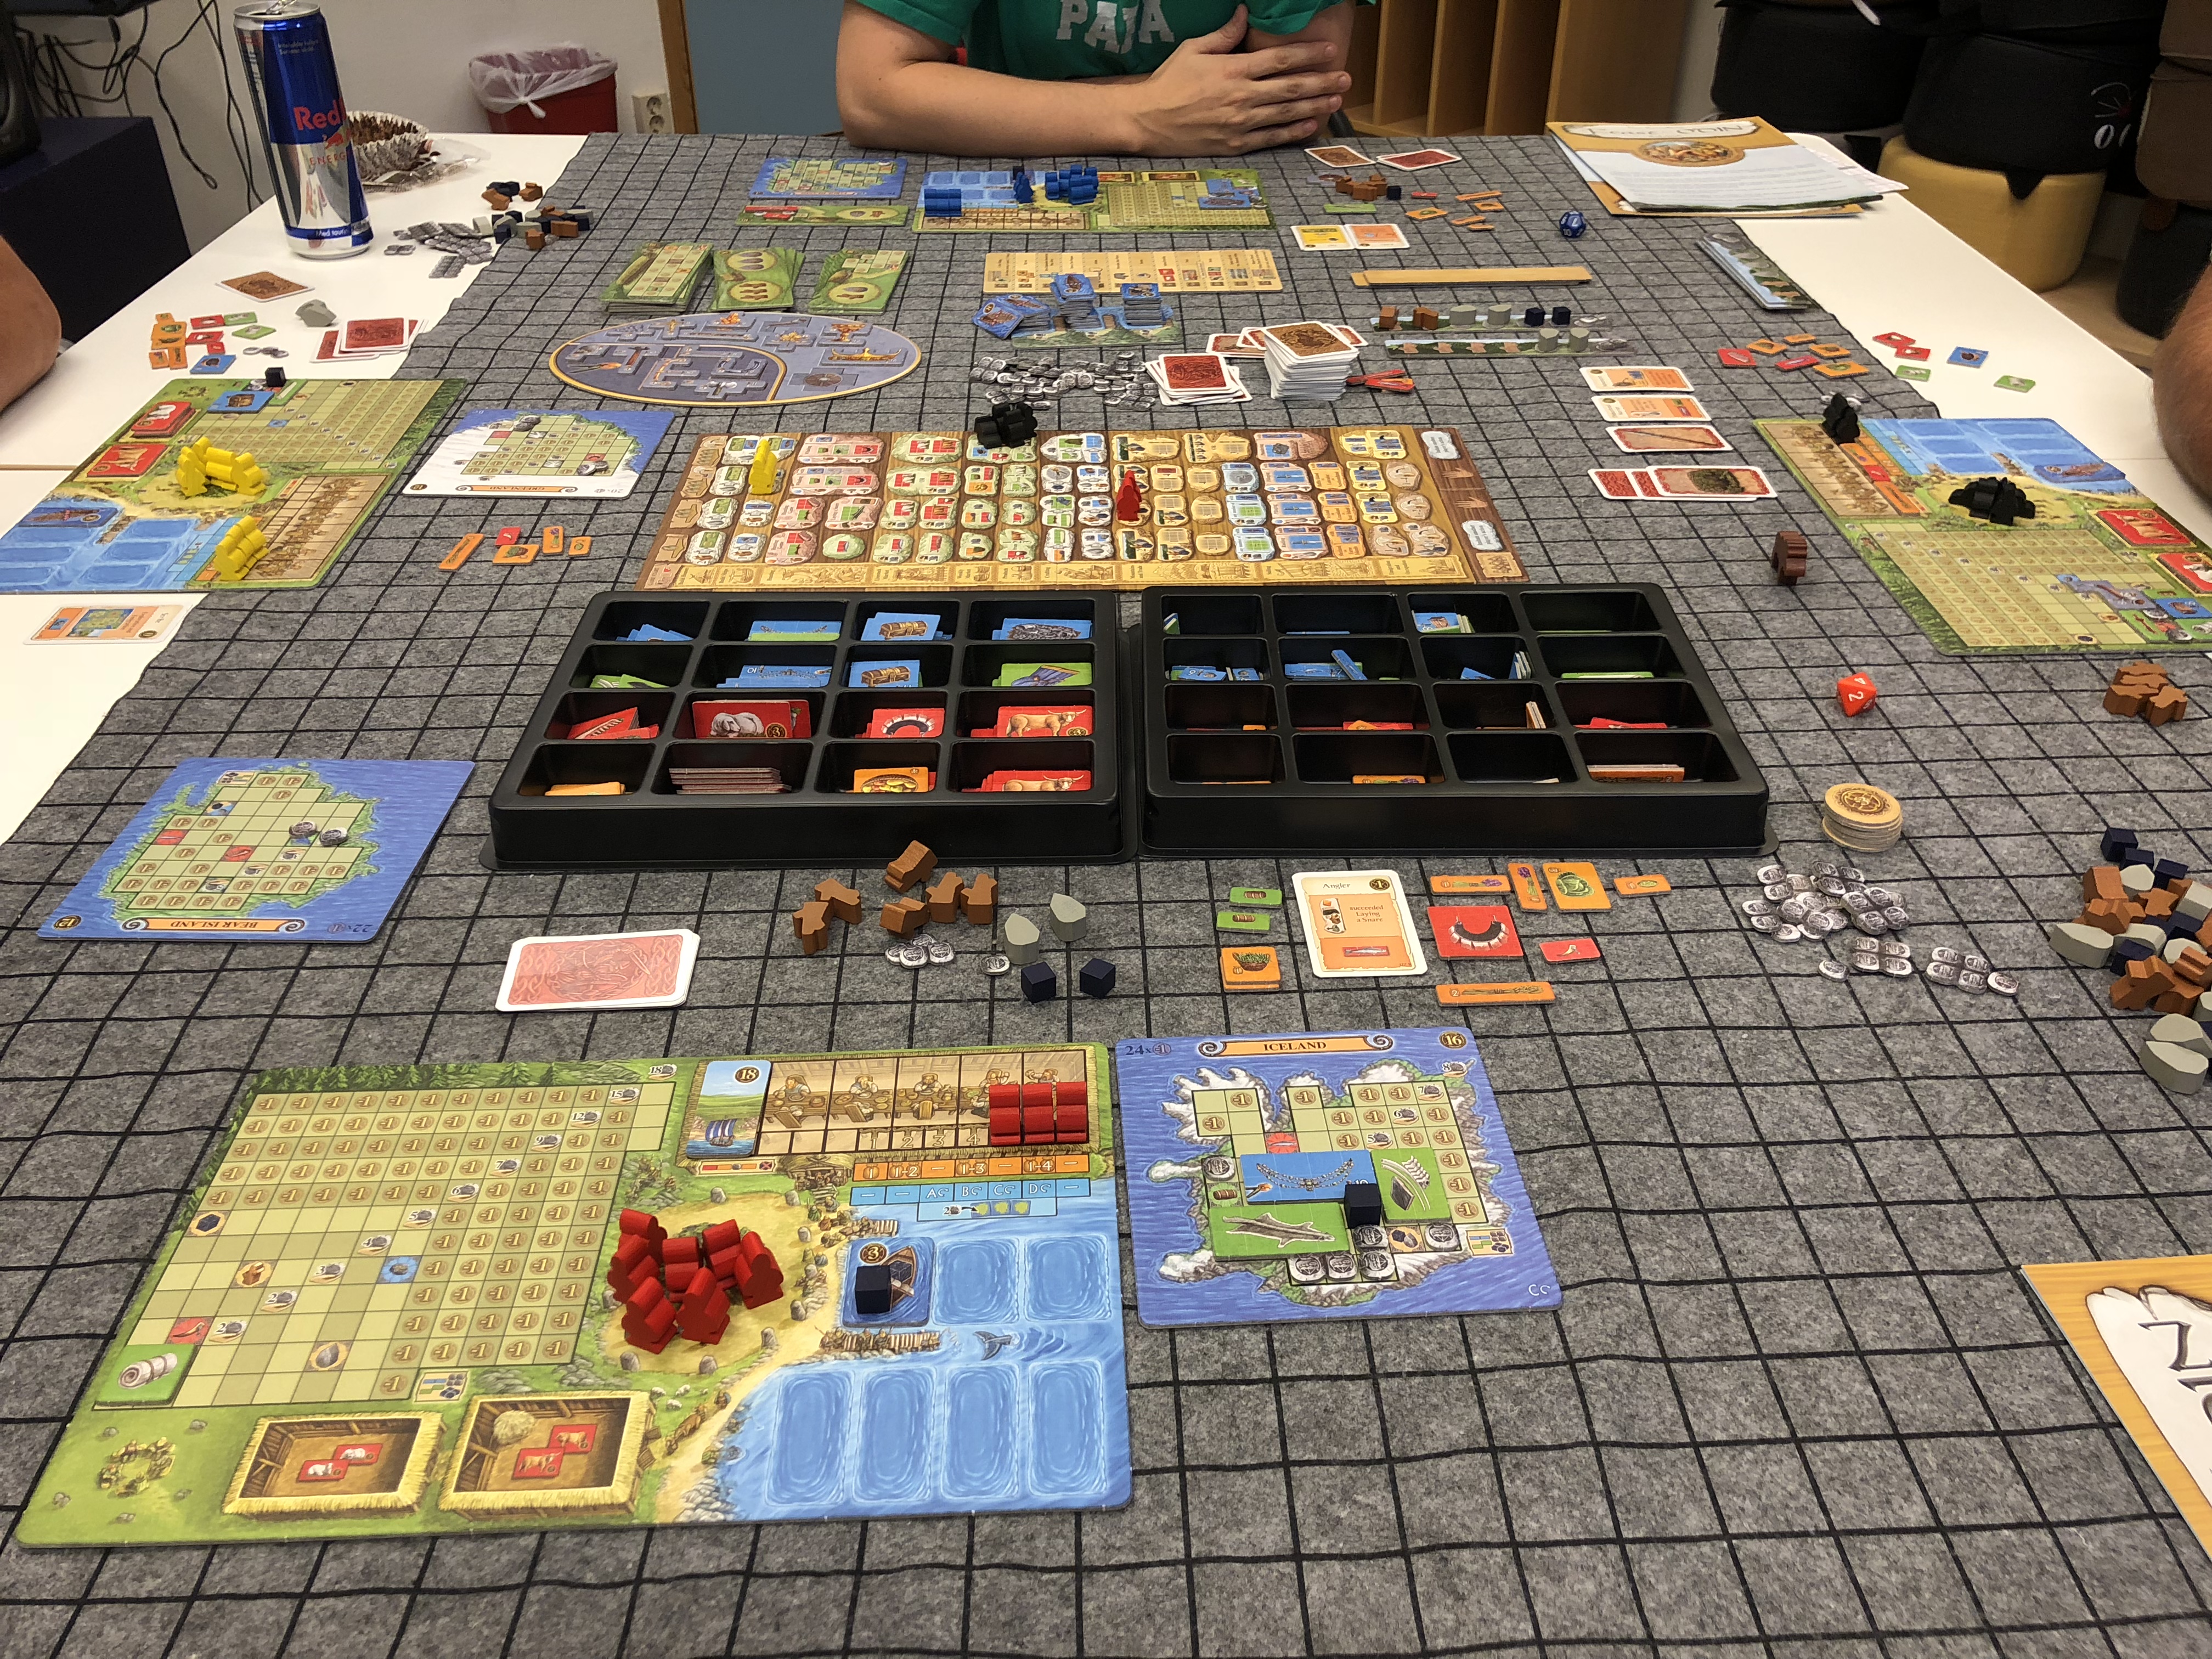 Feast For Odin